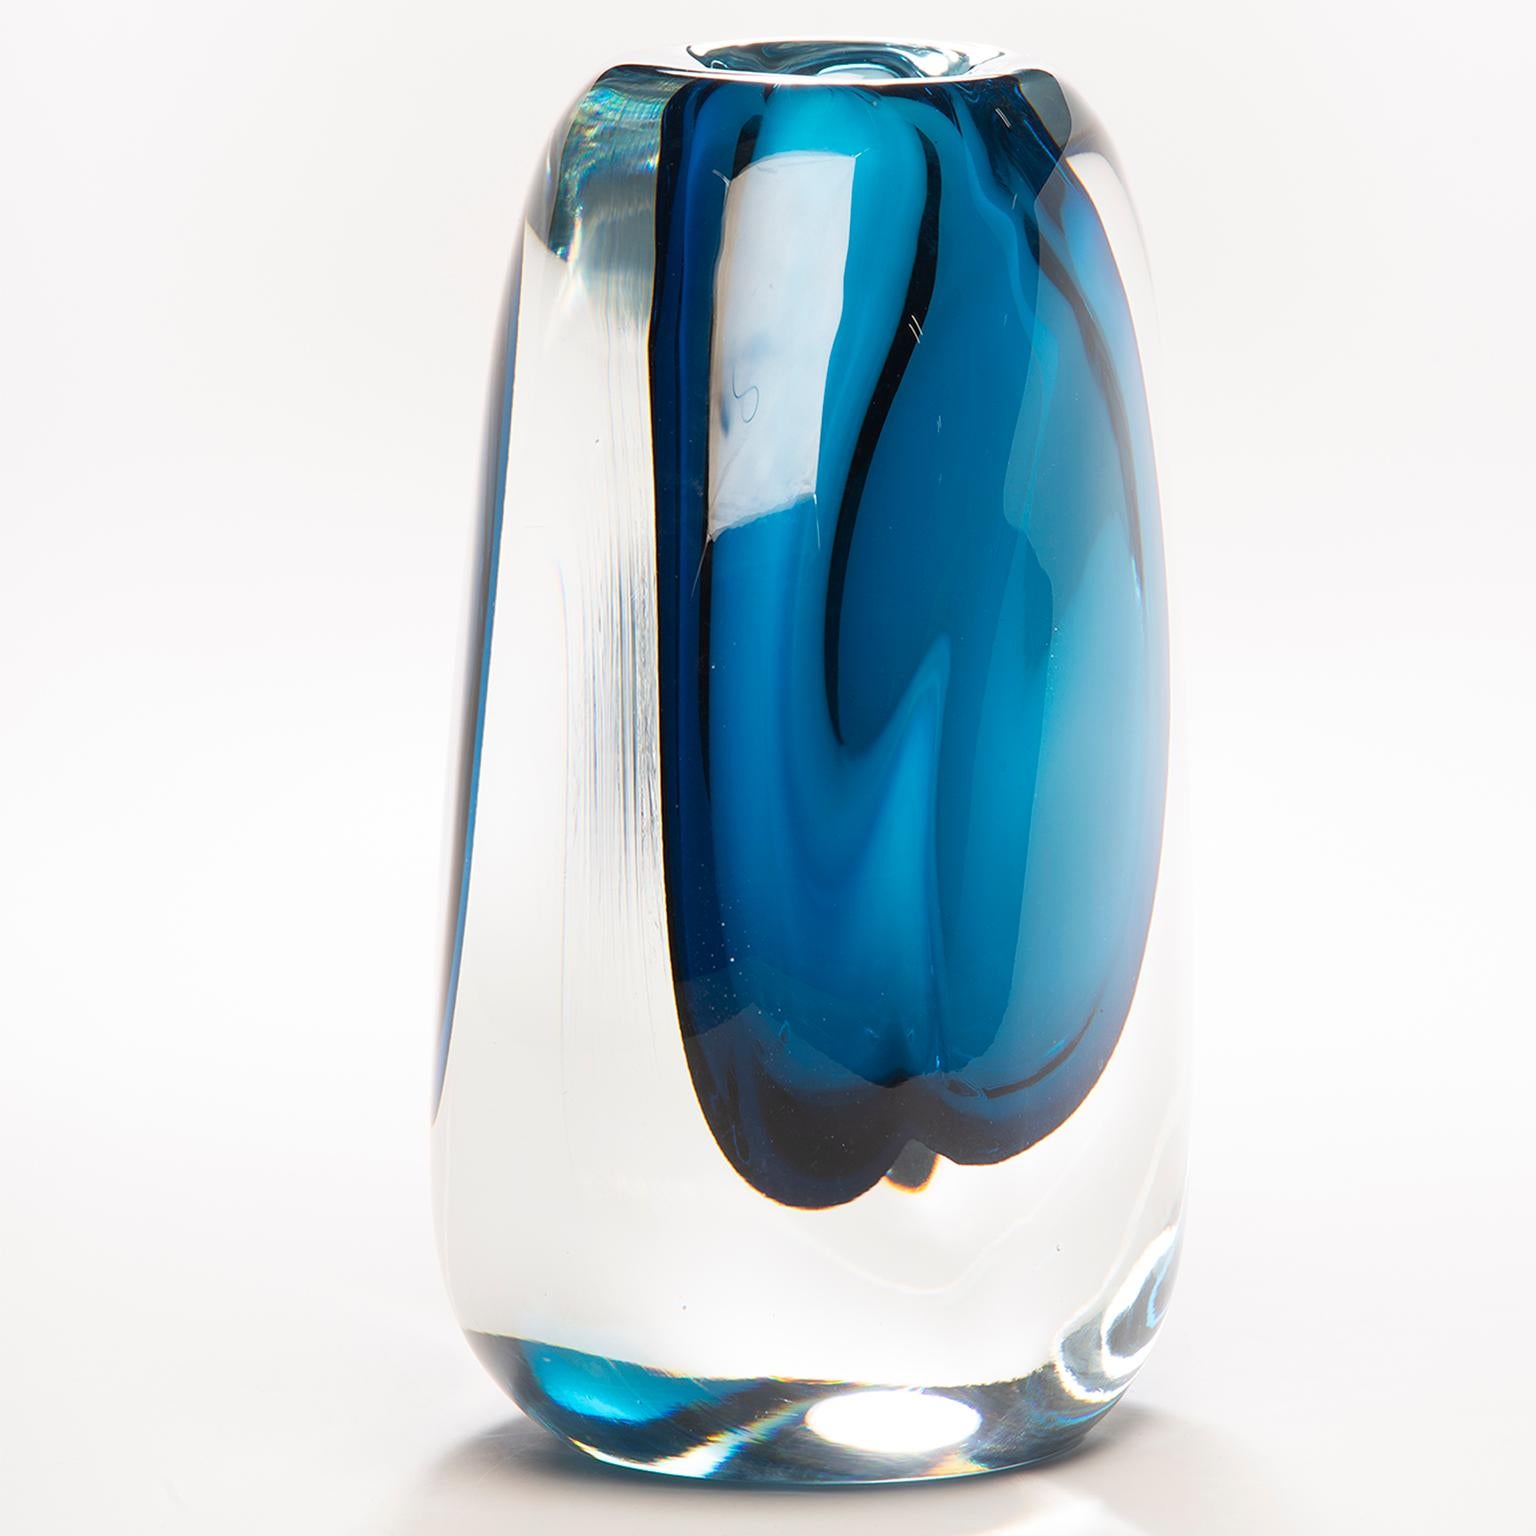 Hand blown in Finland, this Sommerso style tall art glass vase has a heavy, clear cased glass outer layer and blue colored core. New with no flaws found.